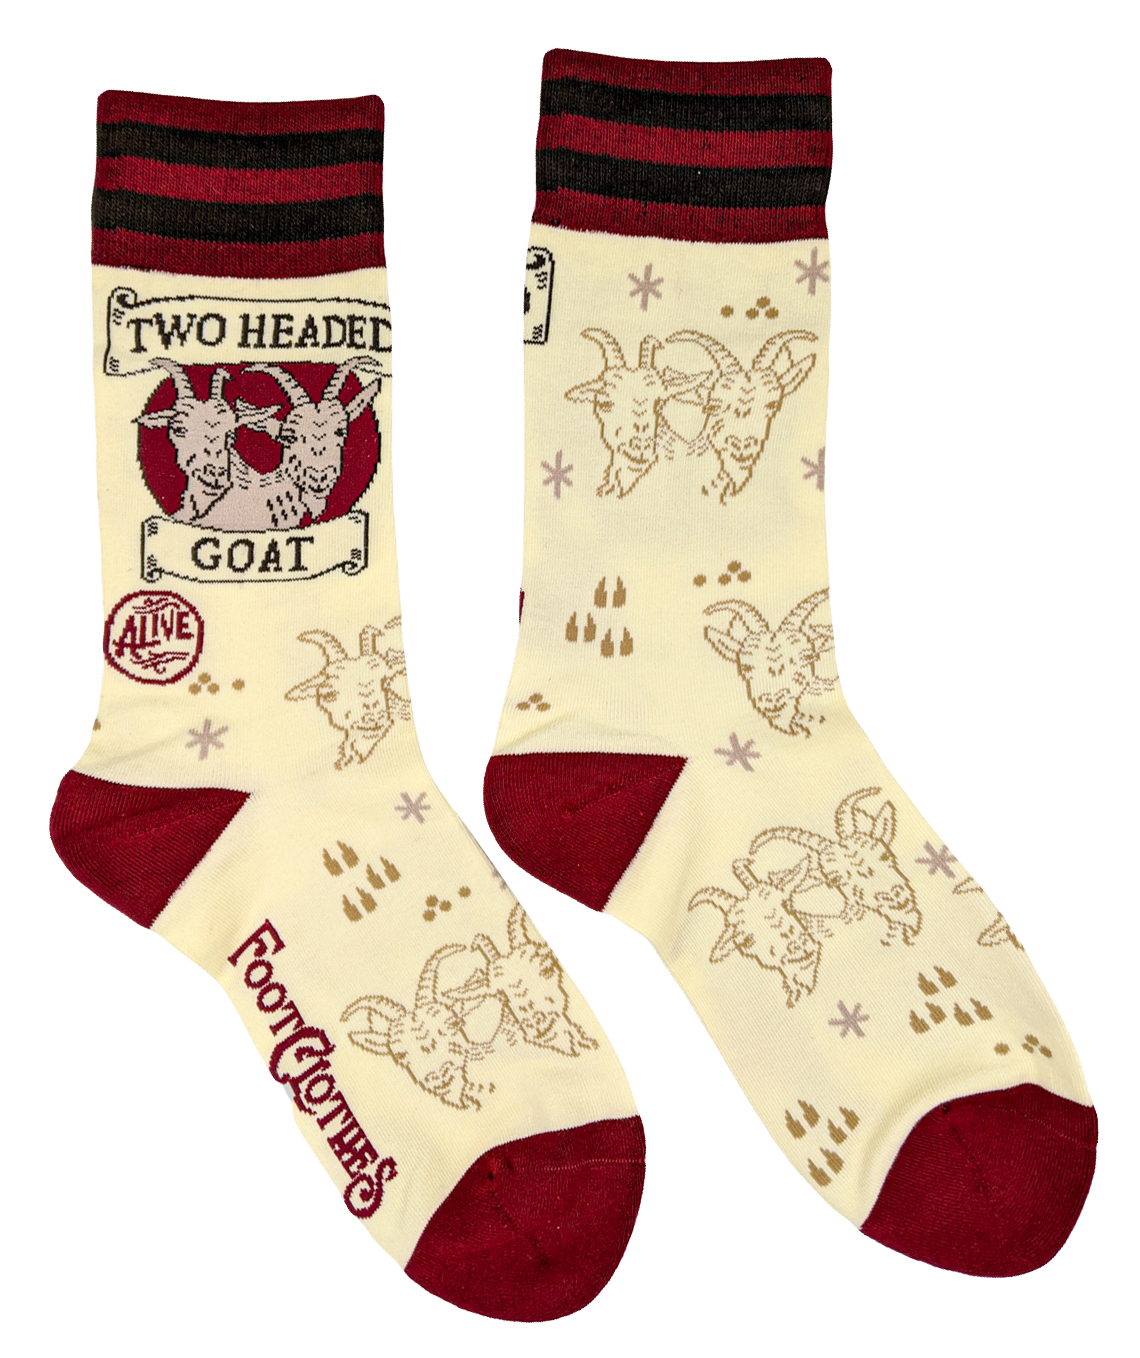 FOOTCLOTHES TWO HEADED GOAT CREW SOCKS